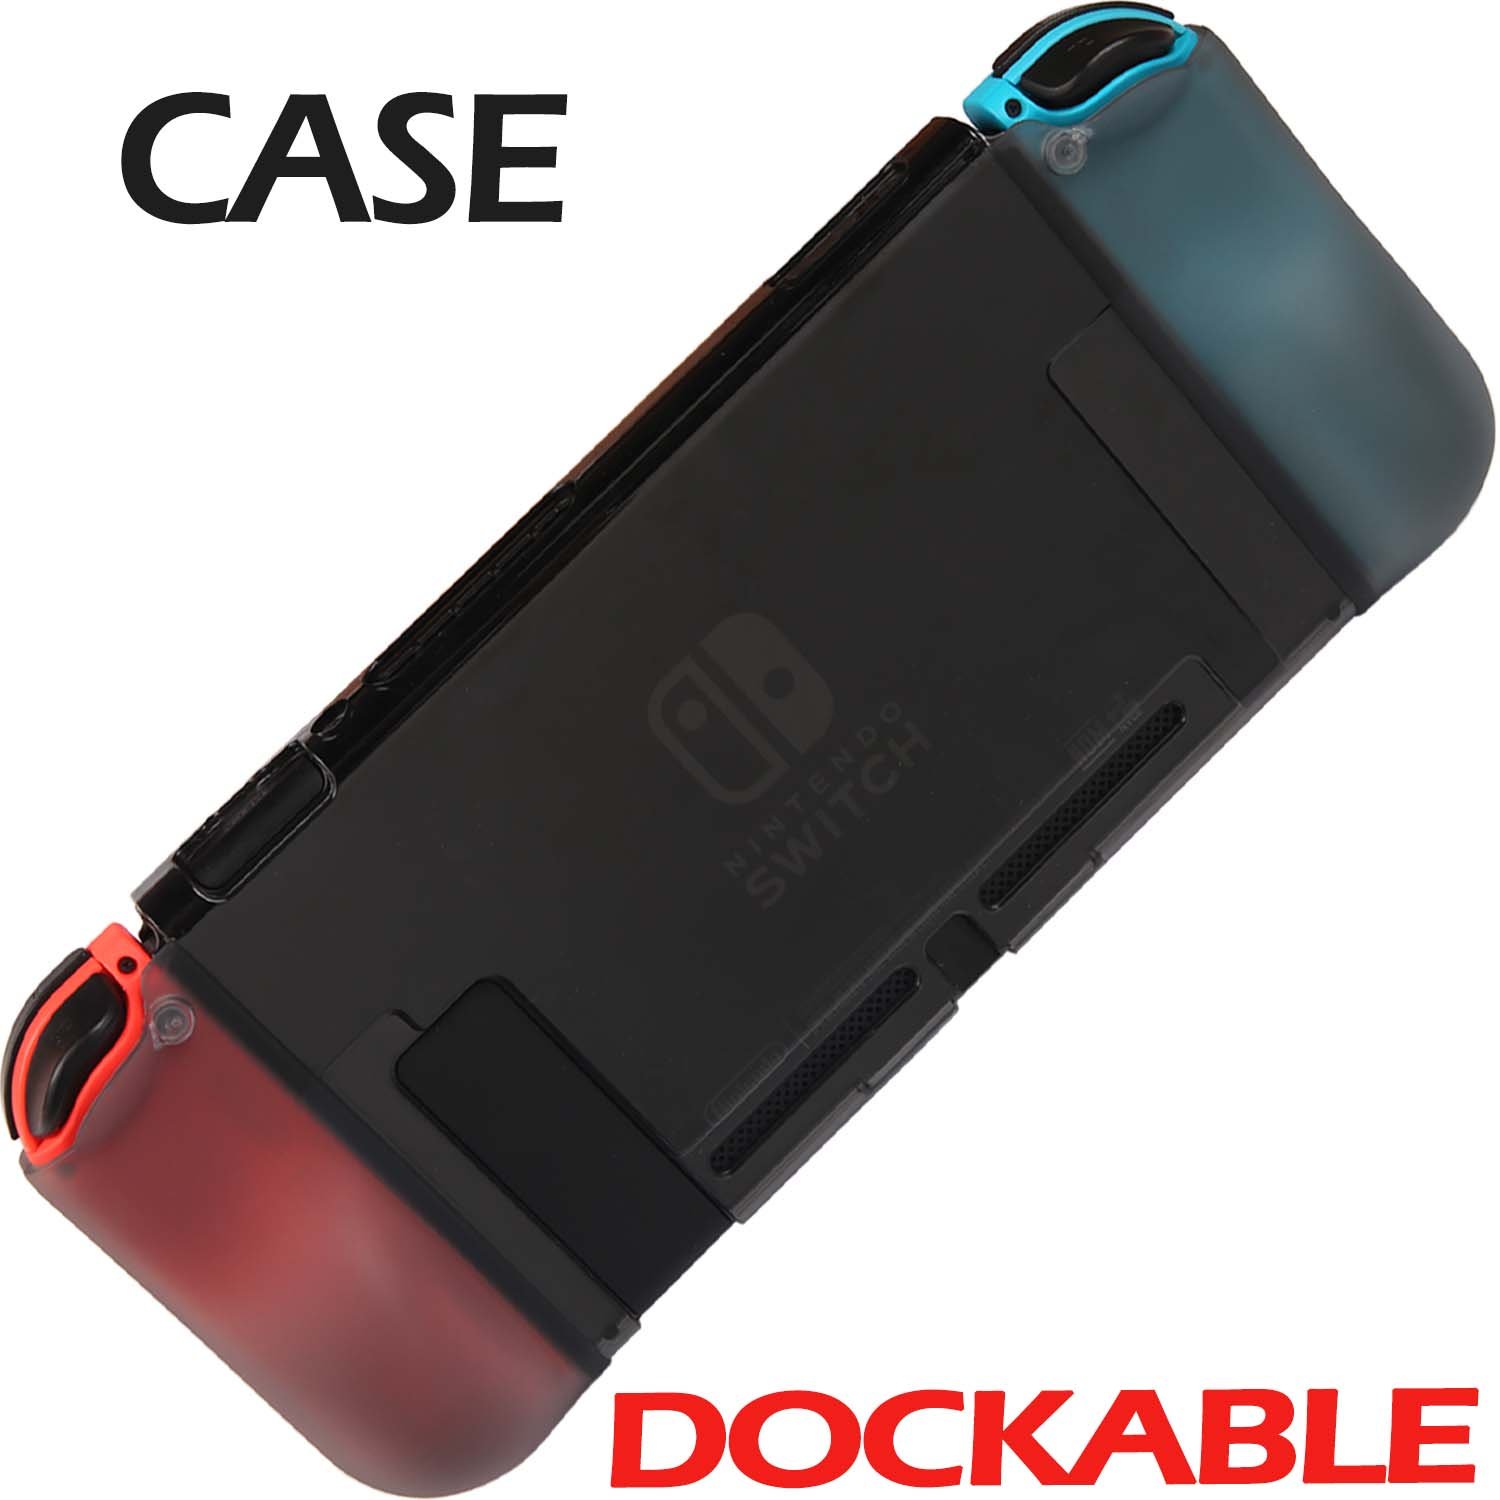 Book Cover Dockable Case for Nintendo Switch - YOOWA Soft TPU Grip Shock-Absorption and Anti-Scratch Dockable Protective Cover Case for Nintendo Switch - Black